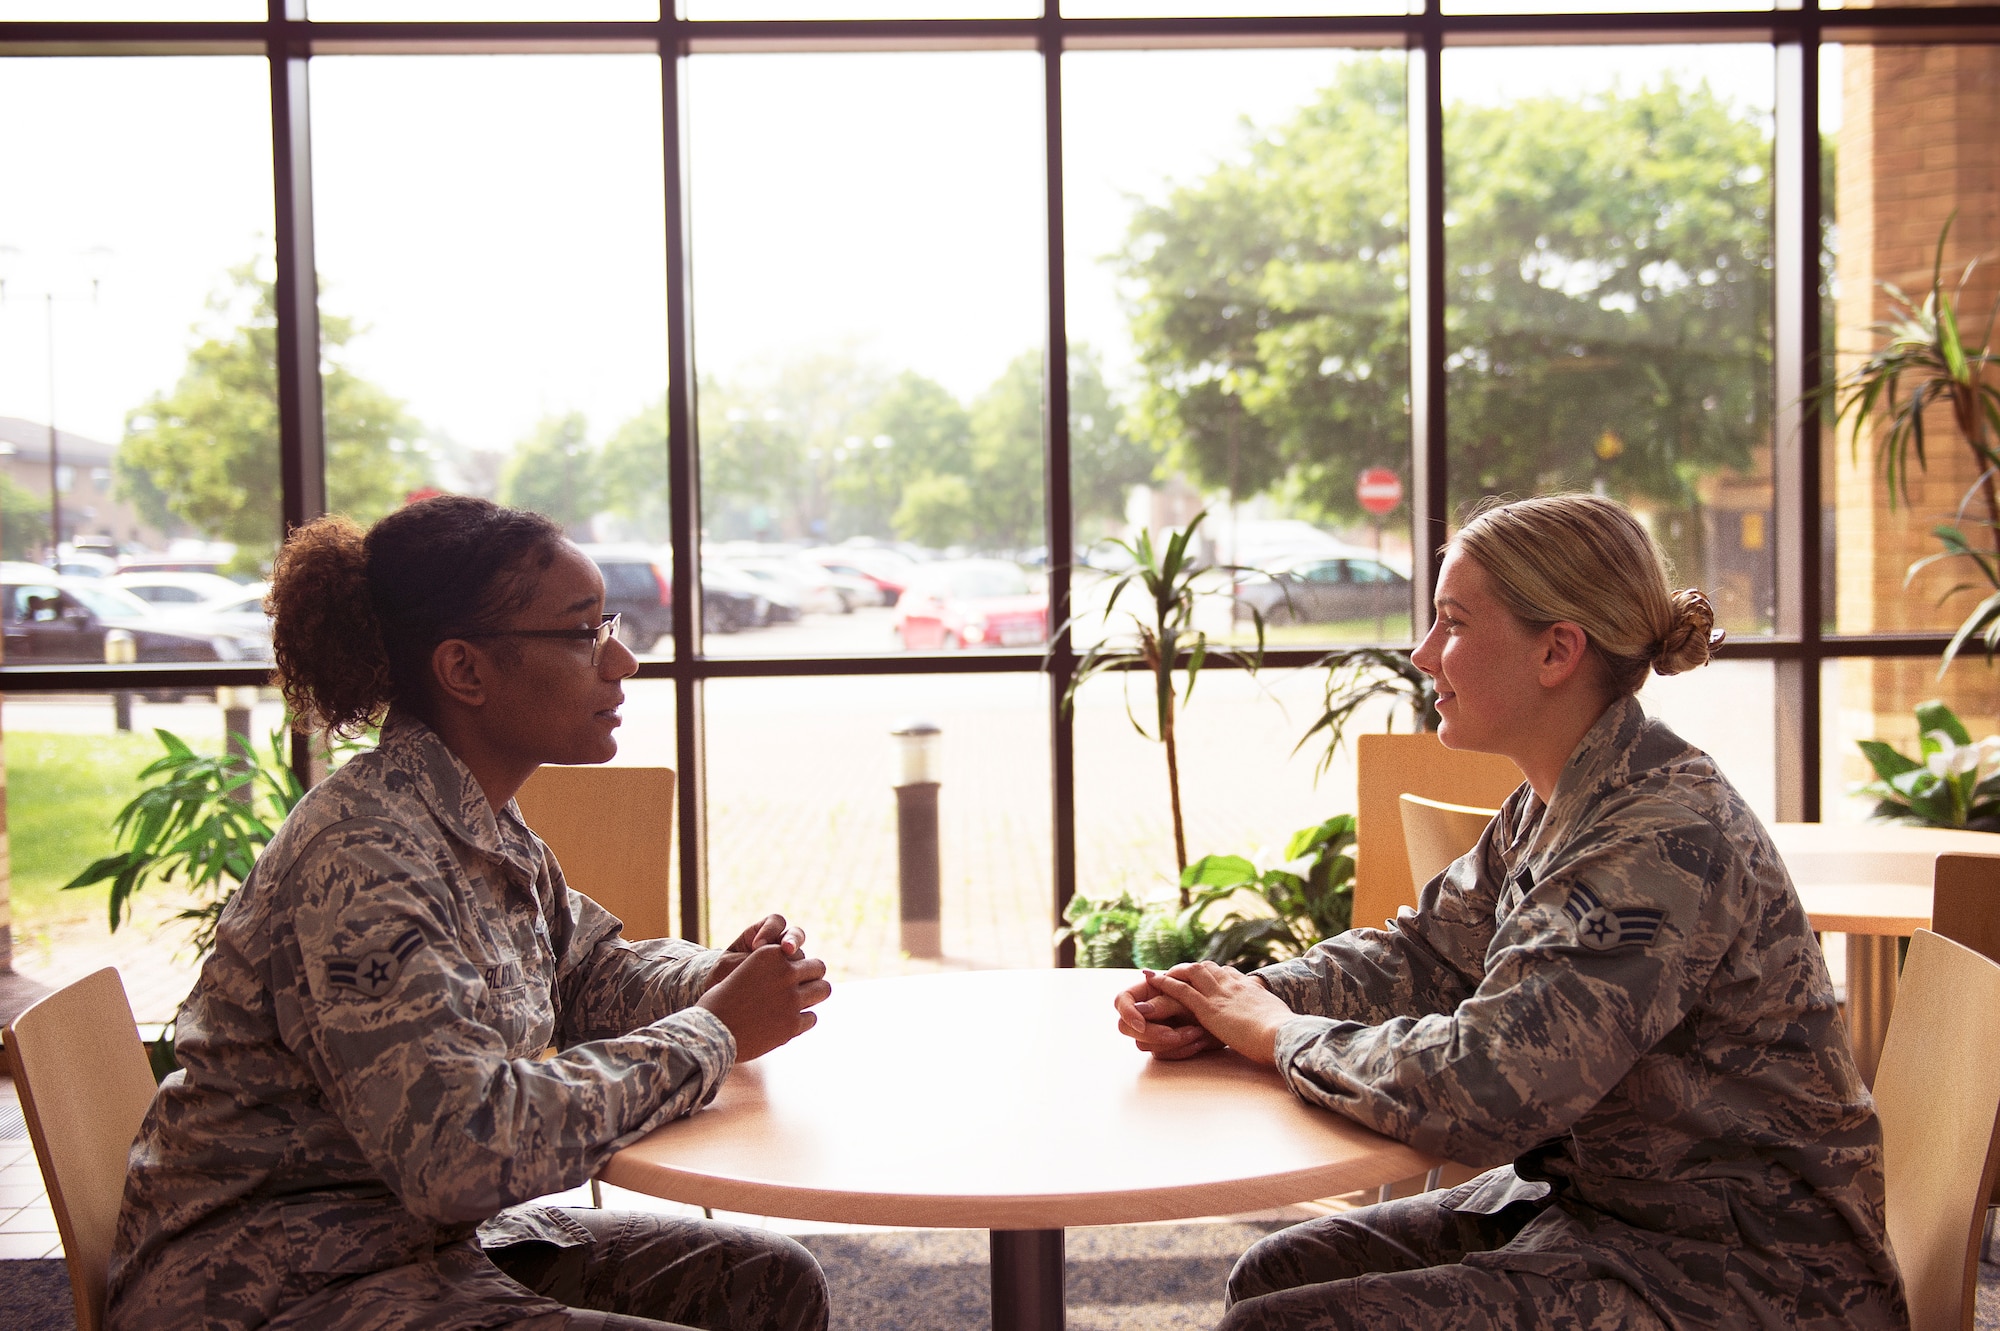 Airman 1st Class China Black (left) and Senior Airman Brianne Herklotz (right), mental health technicians, have a discussion at Royal Air Force Lakenheath, England. (U.S. Air Force photo/Airman 1st Class Shanice Williams-Jones)